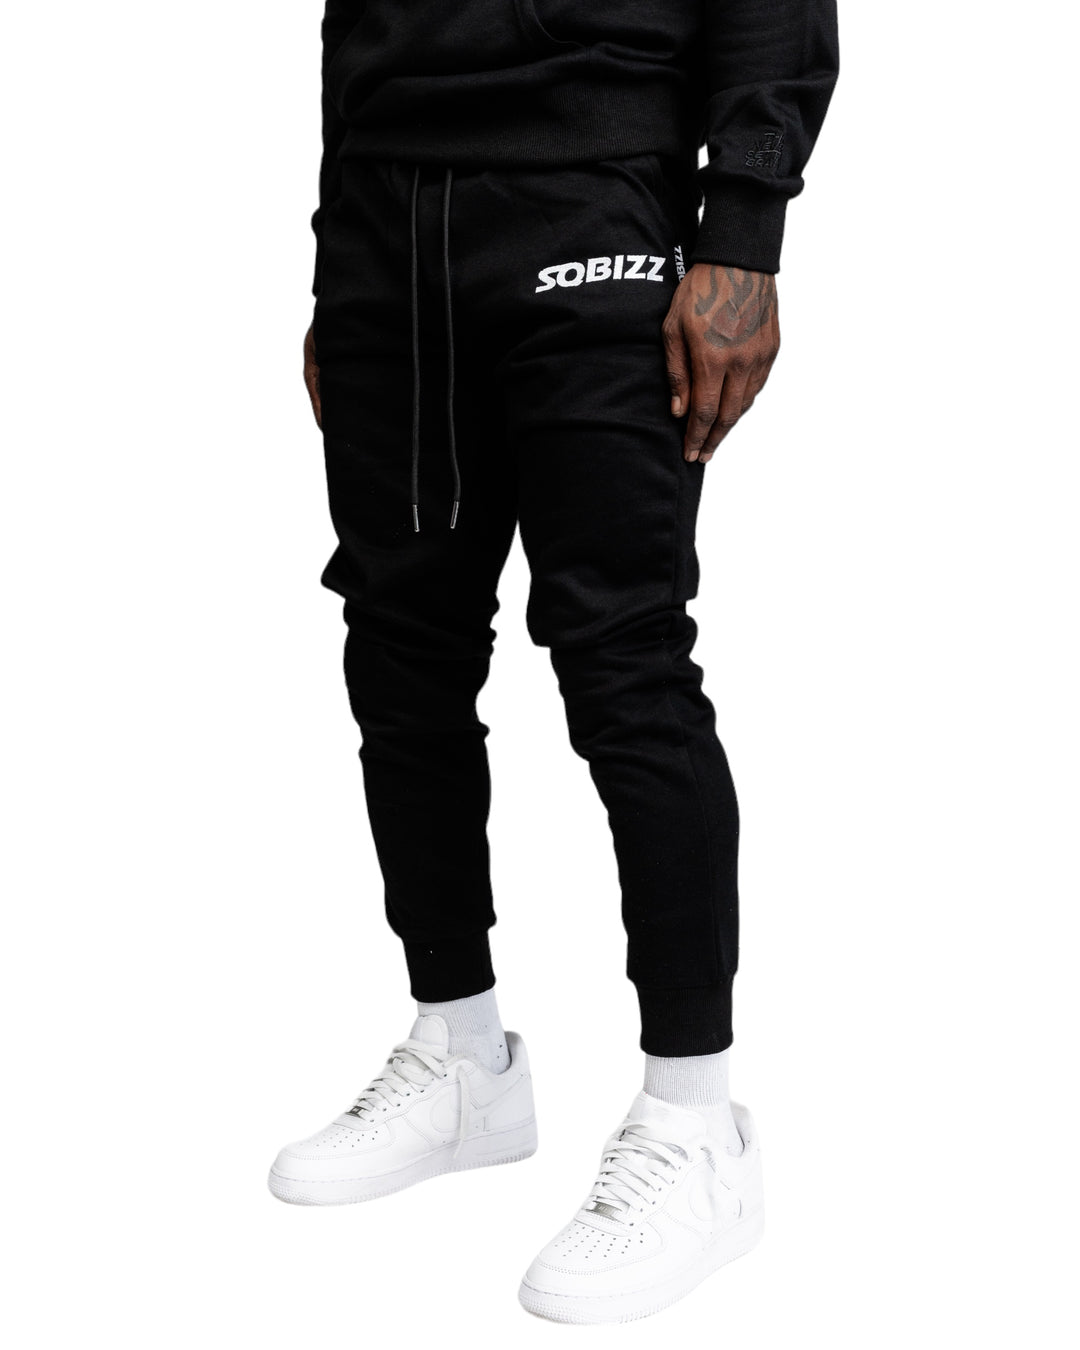 Essential Joggers in Black/White